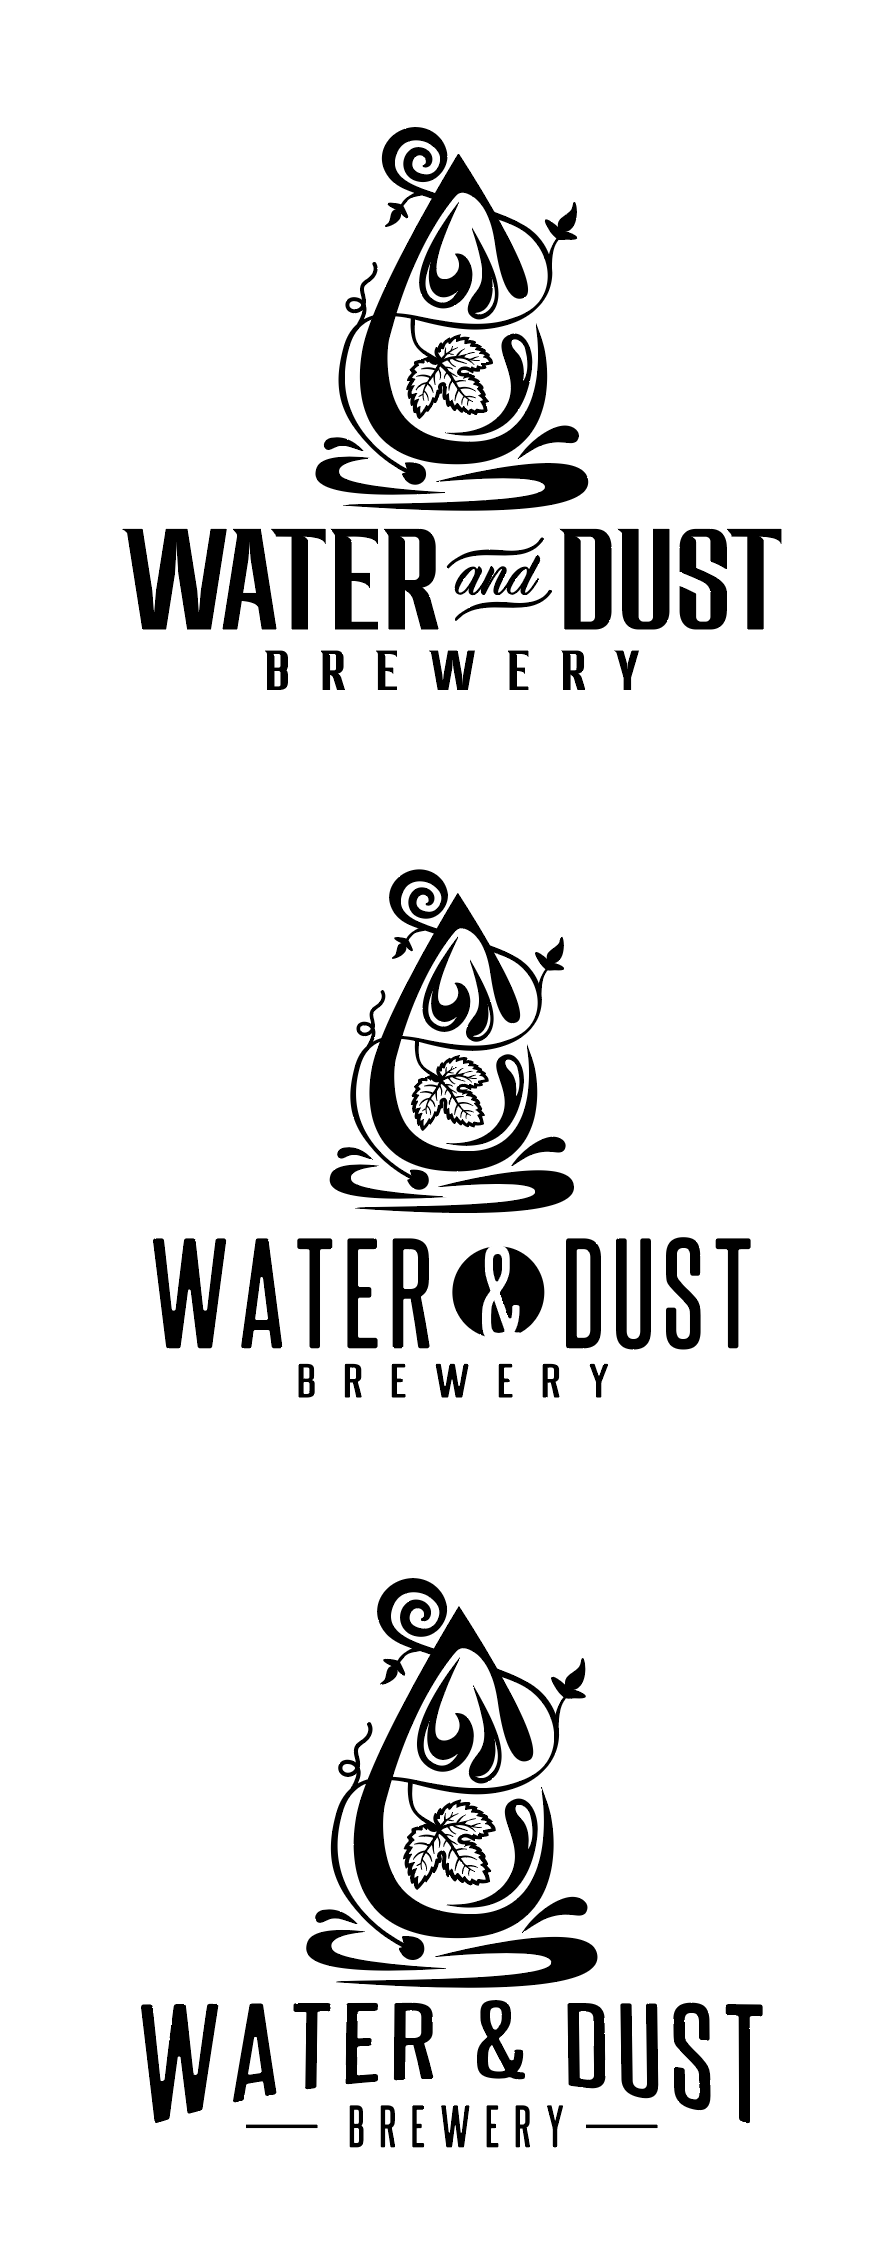 Brand development for brewery. Logo design and brand identity for beer 